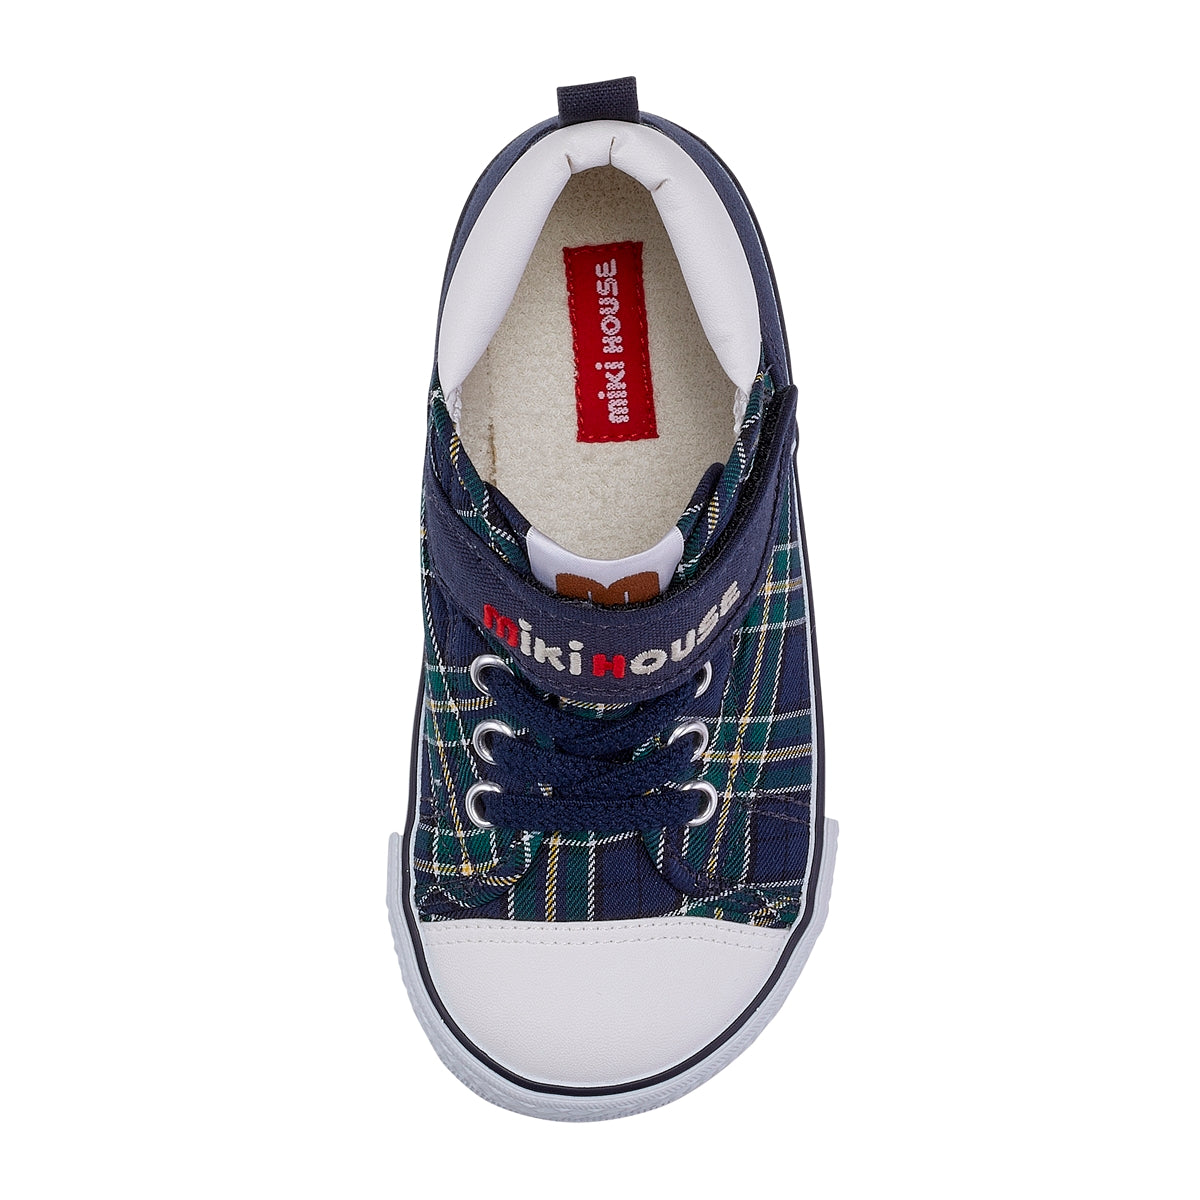 Traditional Tartan Sneakers for Kids